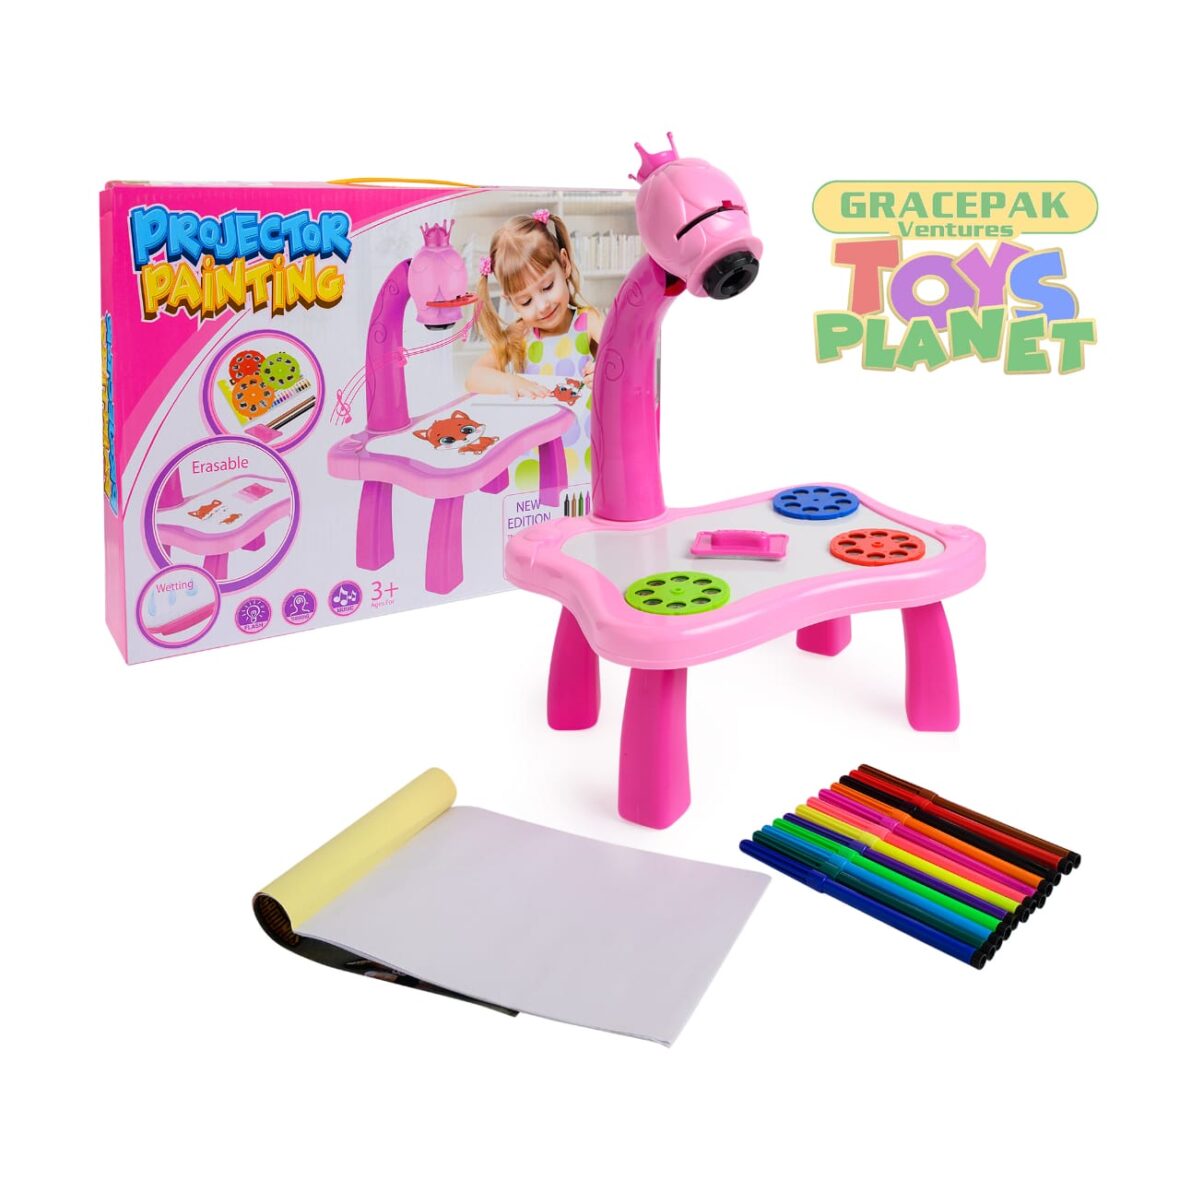 Projector Painting Art Drawing Table For Kids – Pink